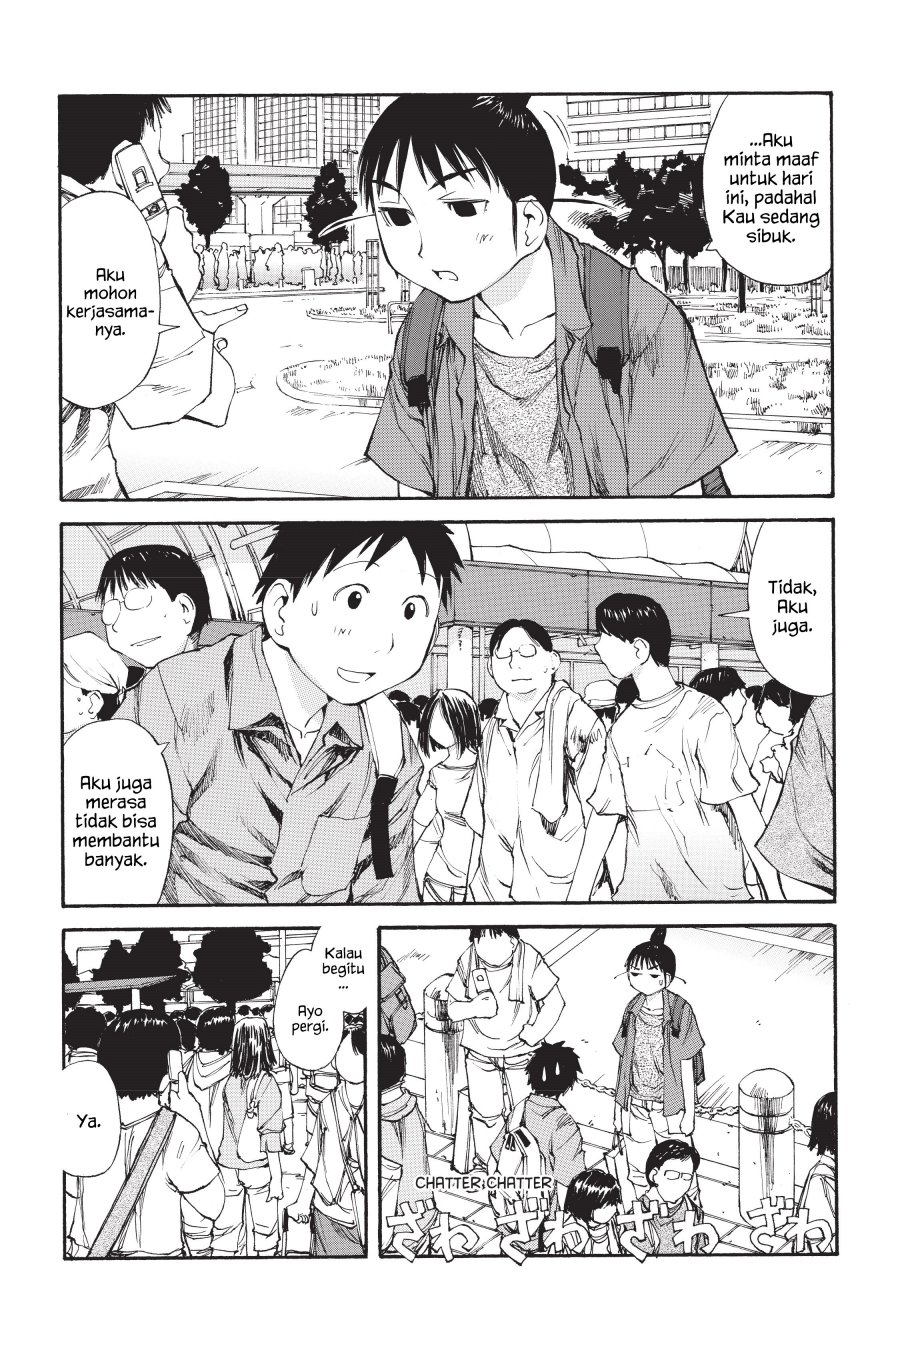 Genshiken – The Society for the Study of Modern Visual Culture Chapter 41 Image 1